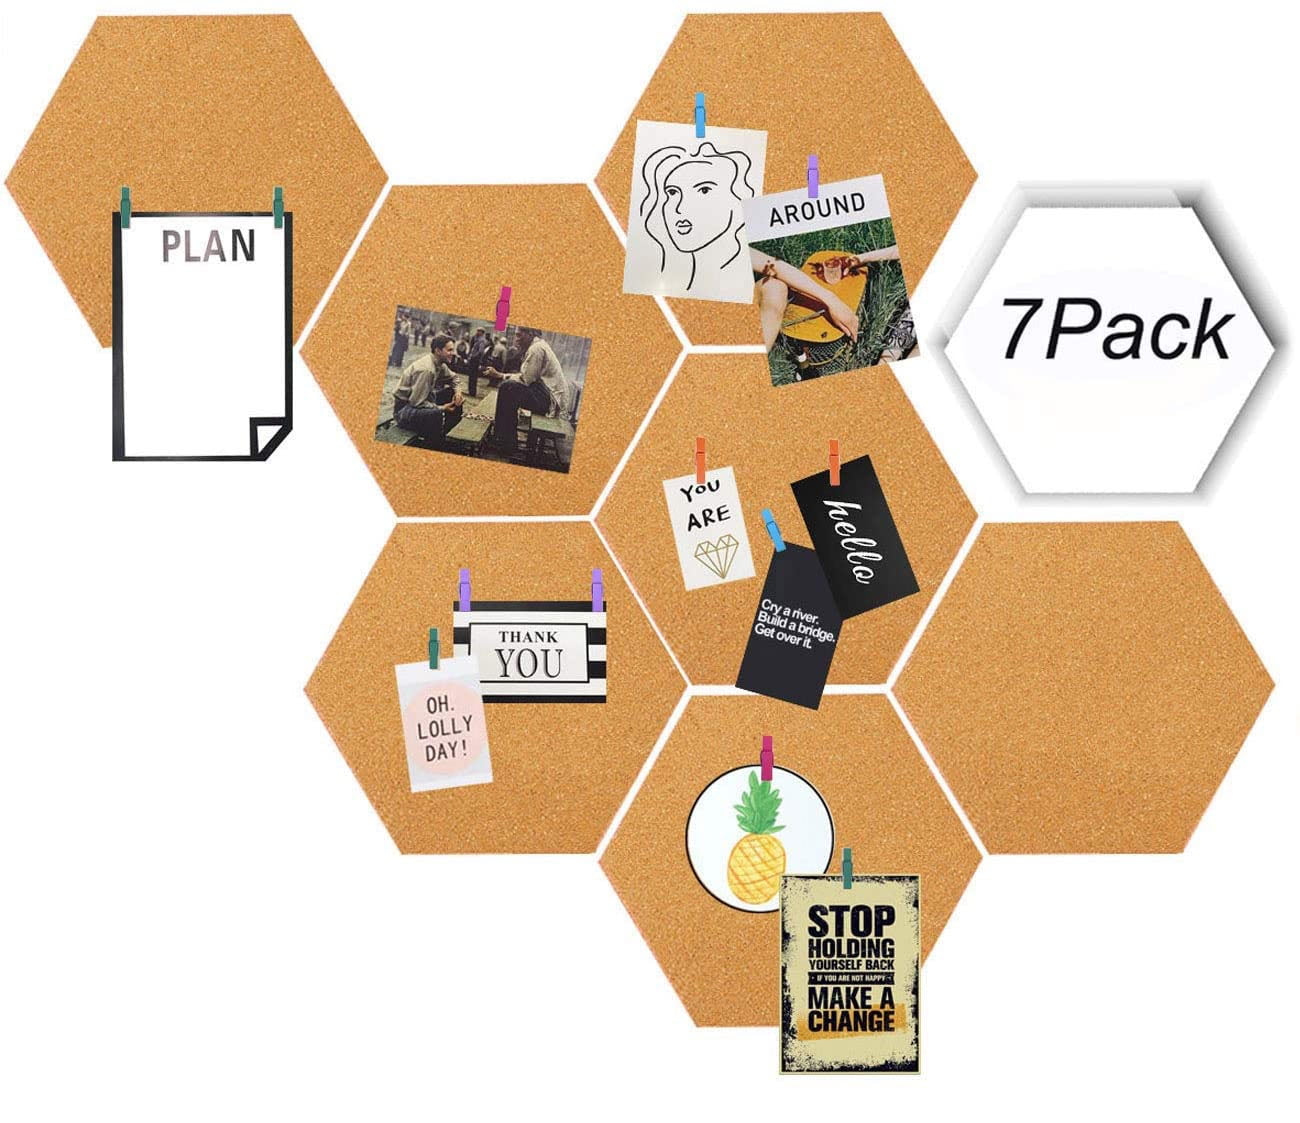 AKTOP Cork Bulletin Board Hexagon 4 Pack, Small Framed Corkboard Tiles for Wall, Thick Decorative Display Boards for Home Office Decor, School